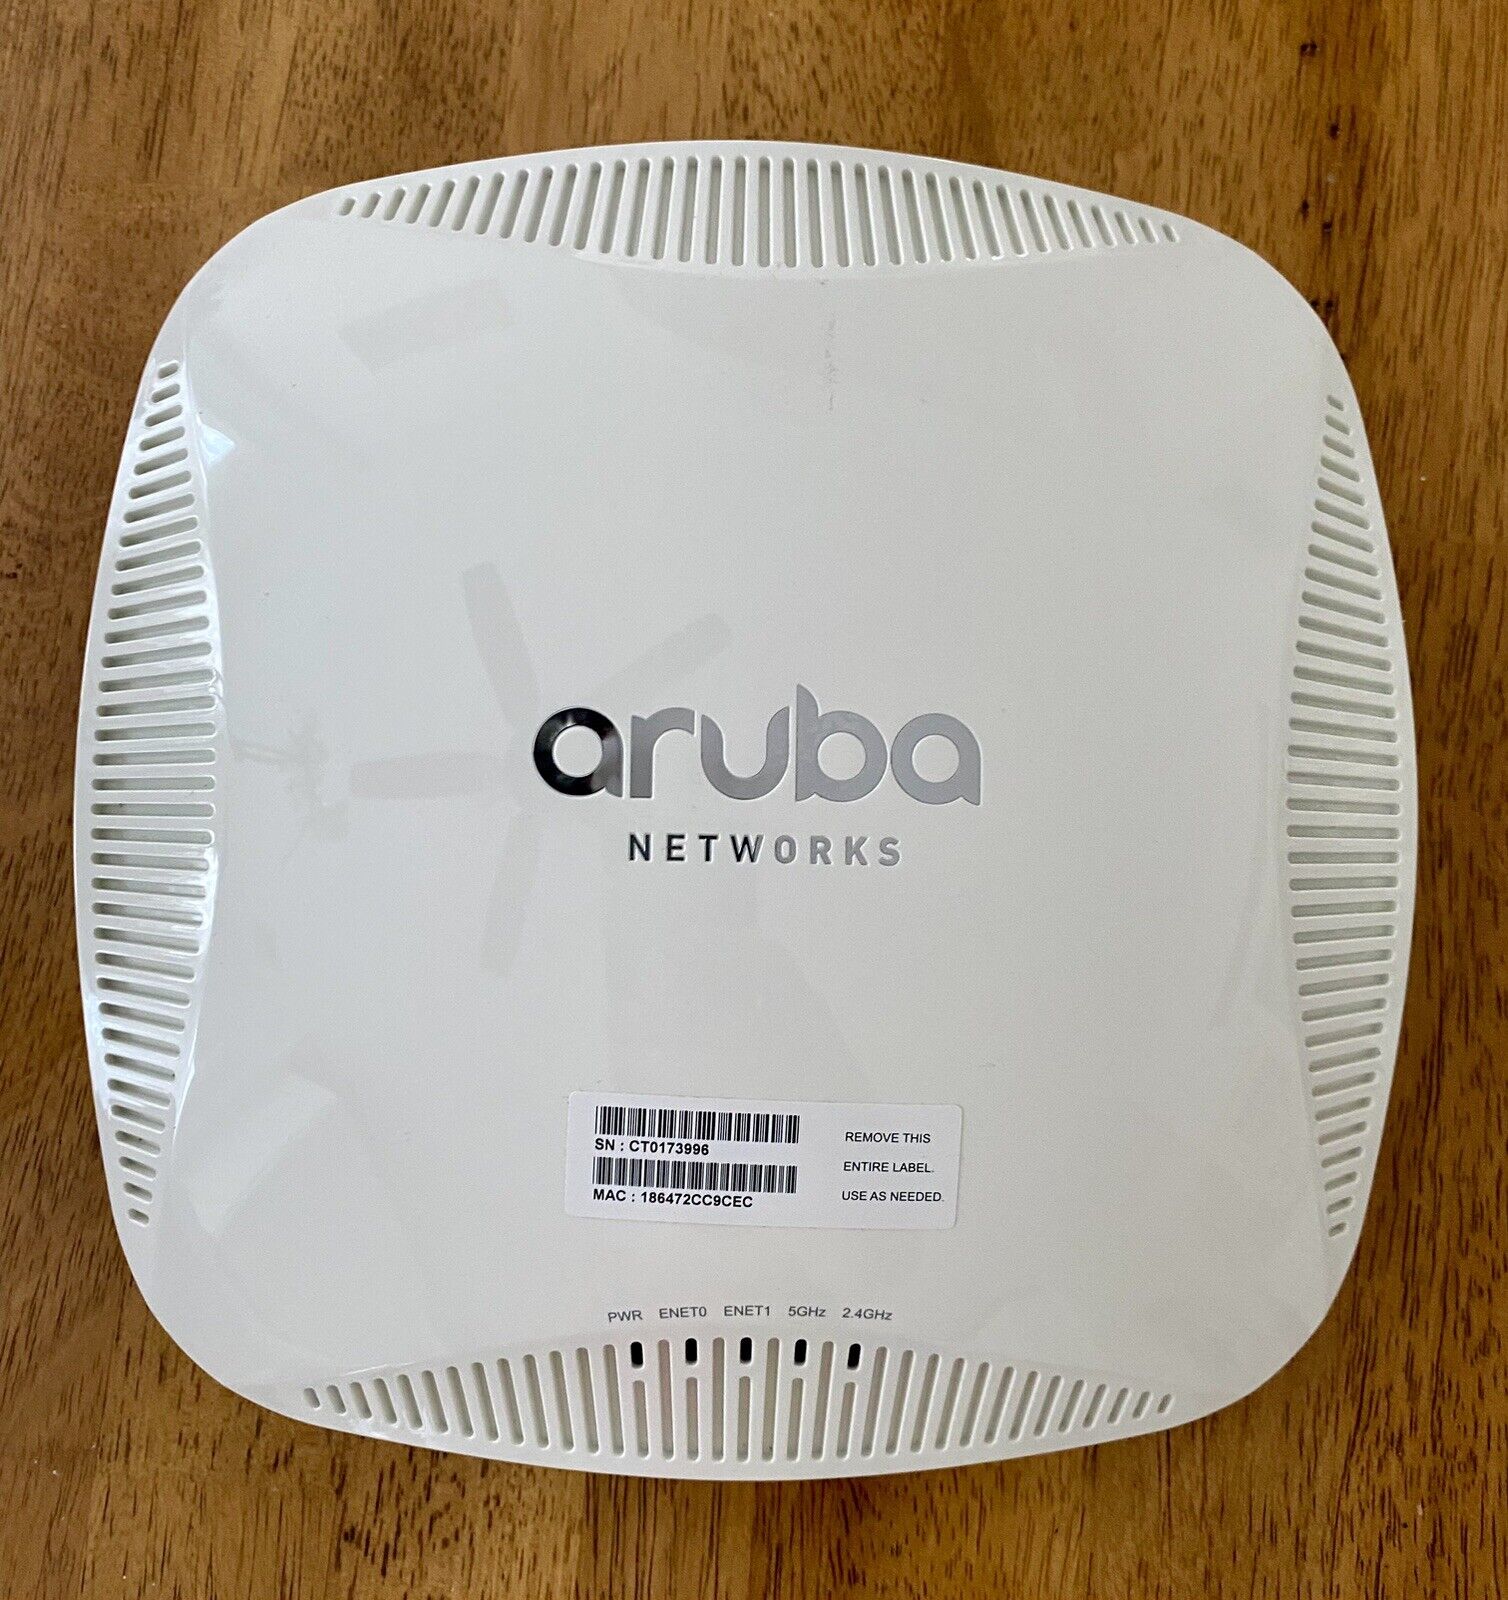 LOT OF 10 Aruba Networks AP-225-US Access Point APIN0225 pre-owned Ten Units